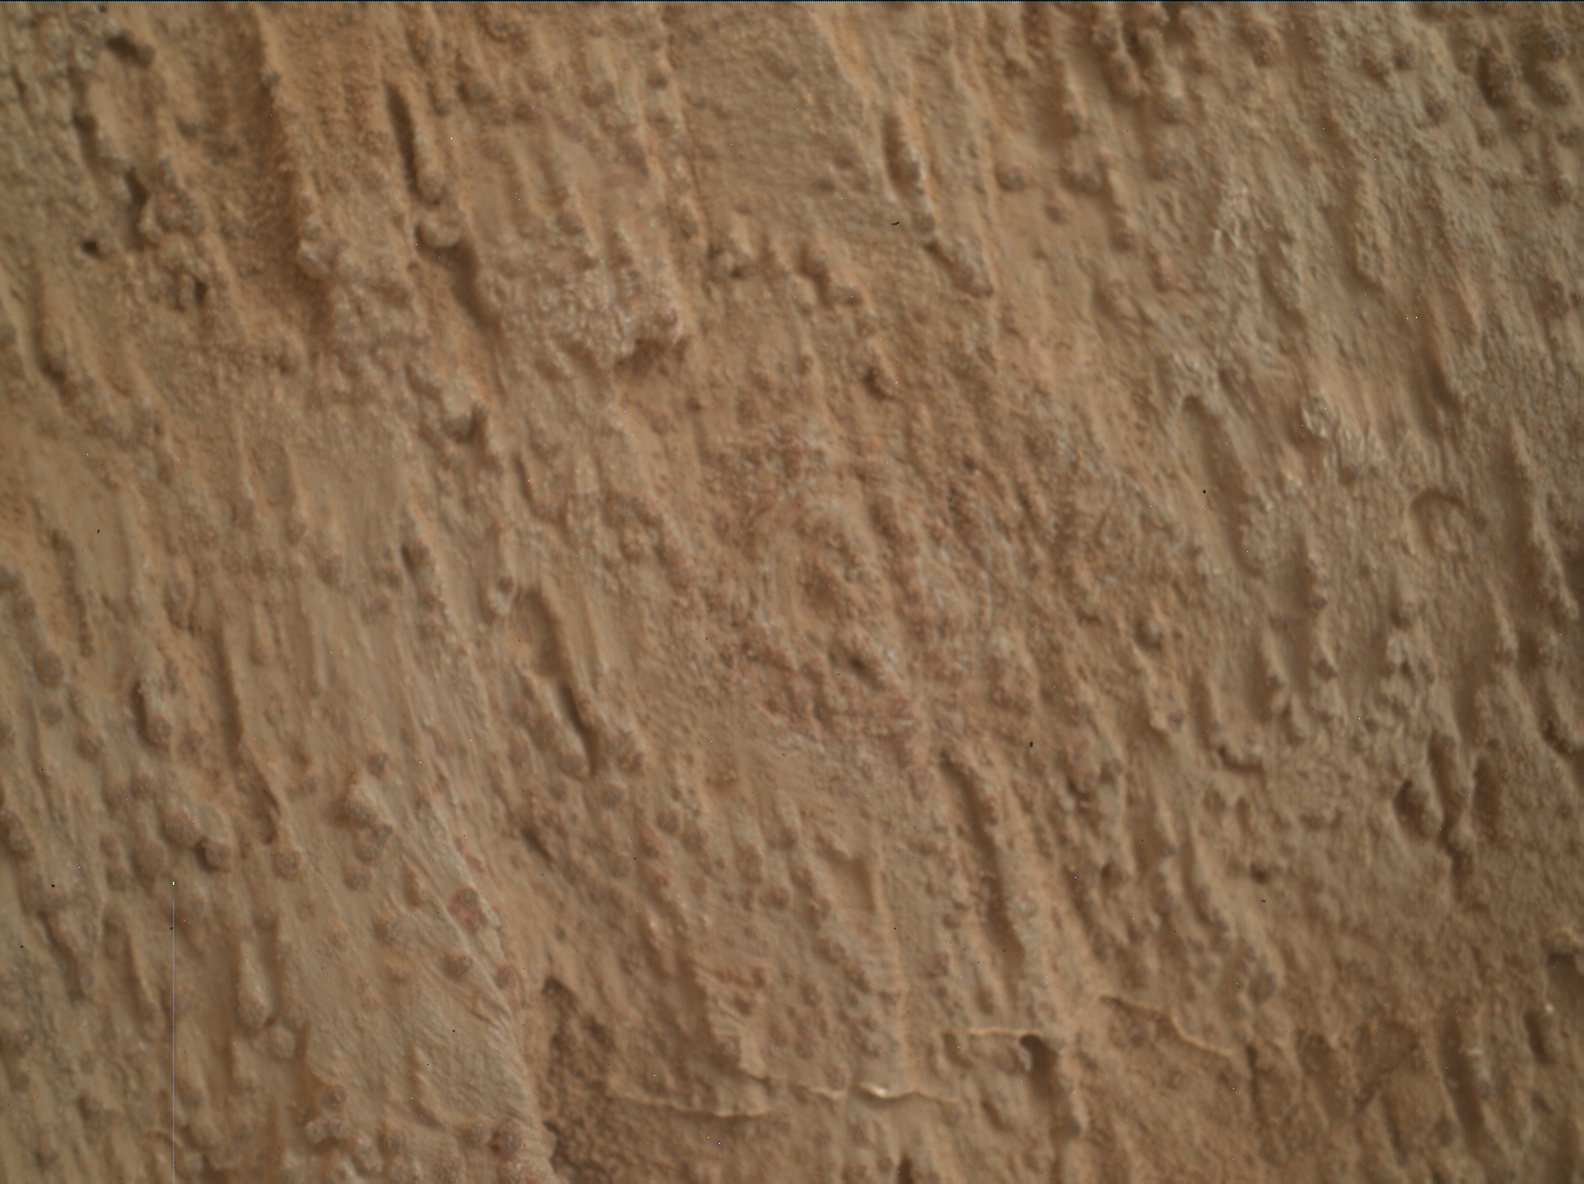 Nasa's Mars rover Curiosity acquired this image using its Mars Hand Lens Imager (MAHLI) on Sol 3321